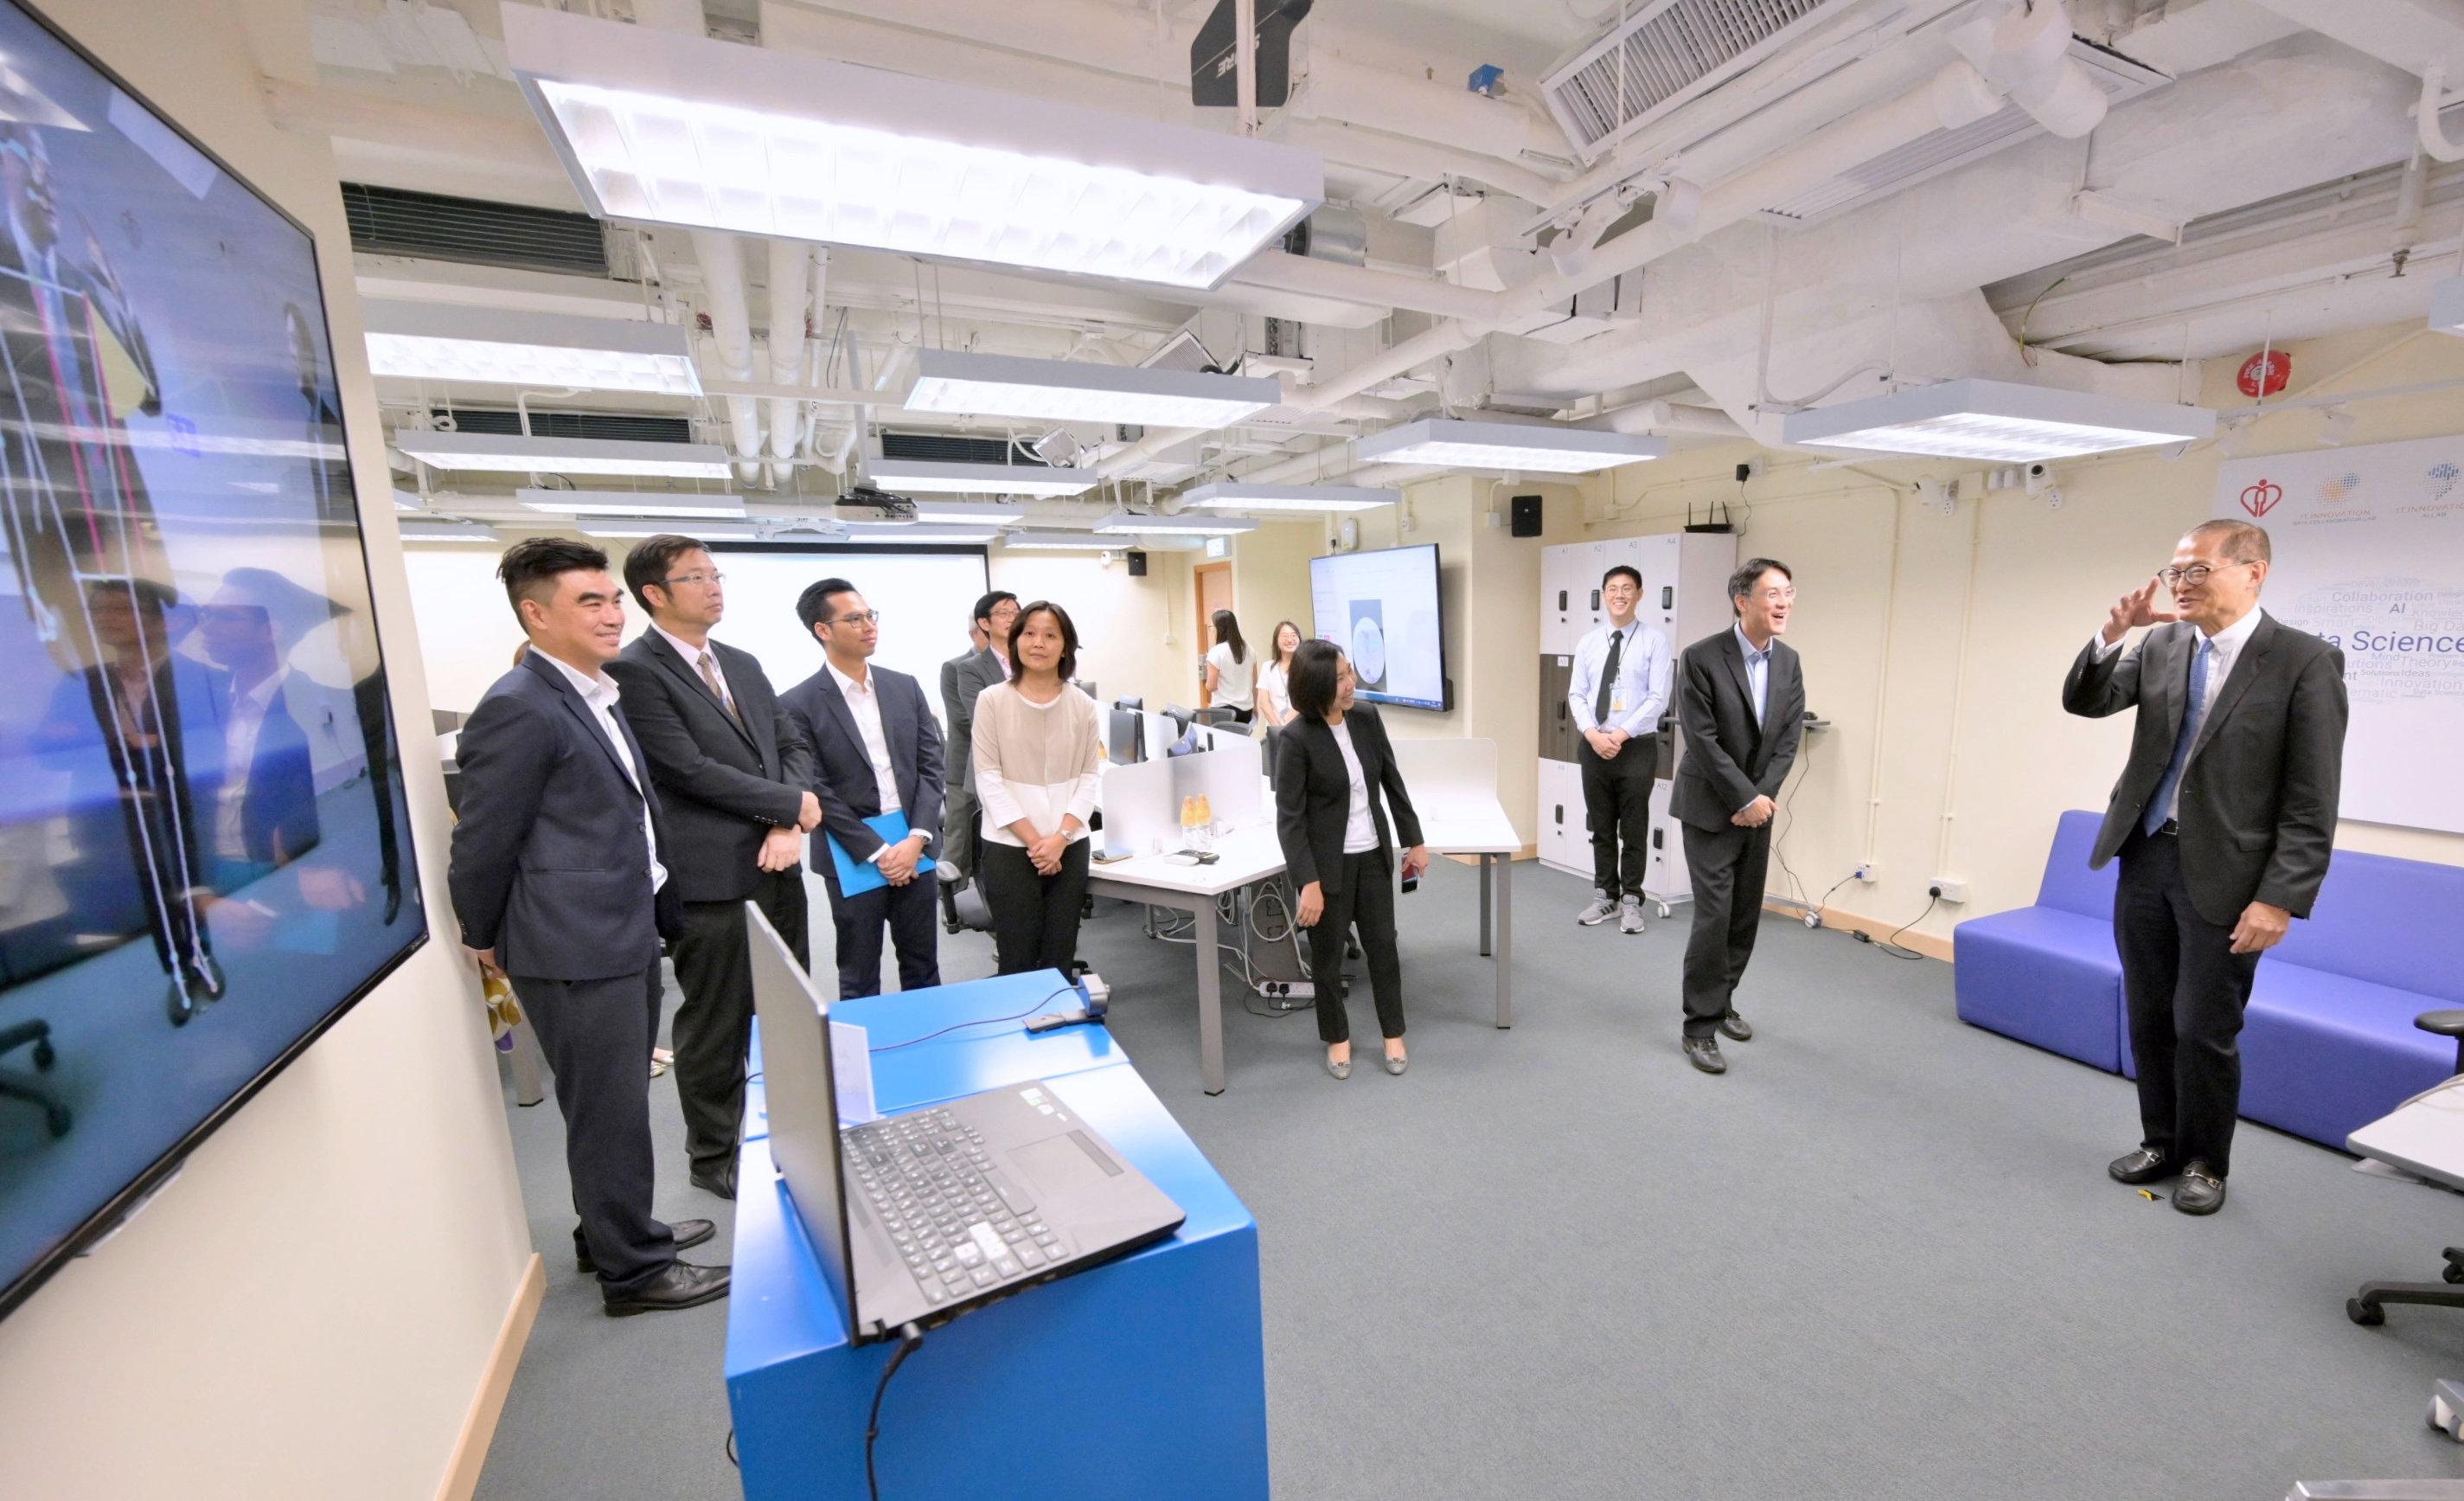 The Secretary for Health, Professor Lo Chung-mau, visited the HA Data Collaboration Lab and the AI Lab this afternoon (July 14). Photo shows Professor Lo (first right) experiencing the facilities in the Lab.